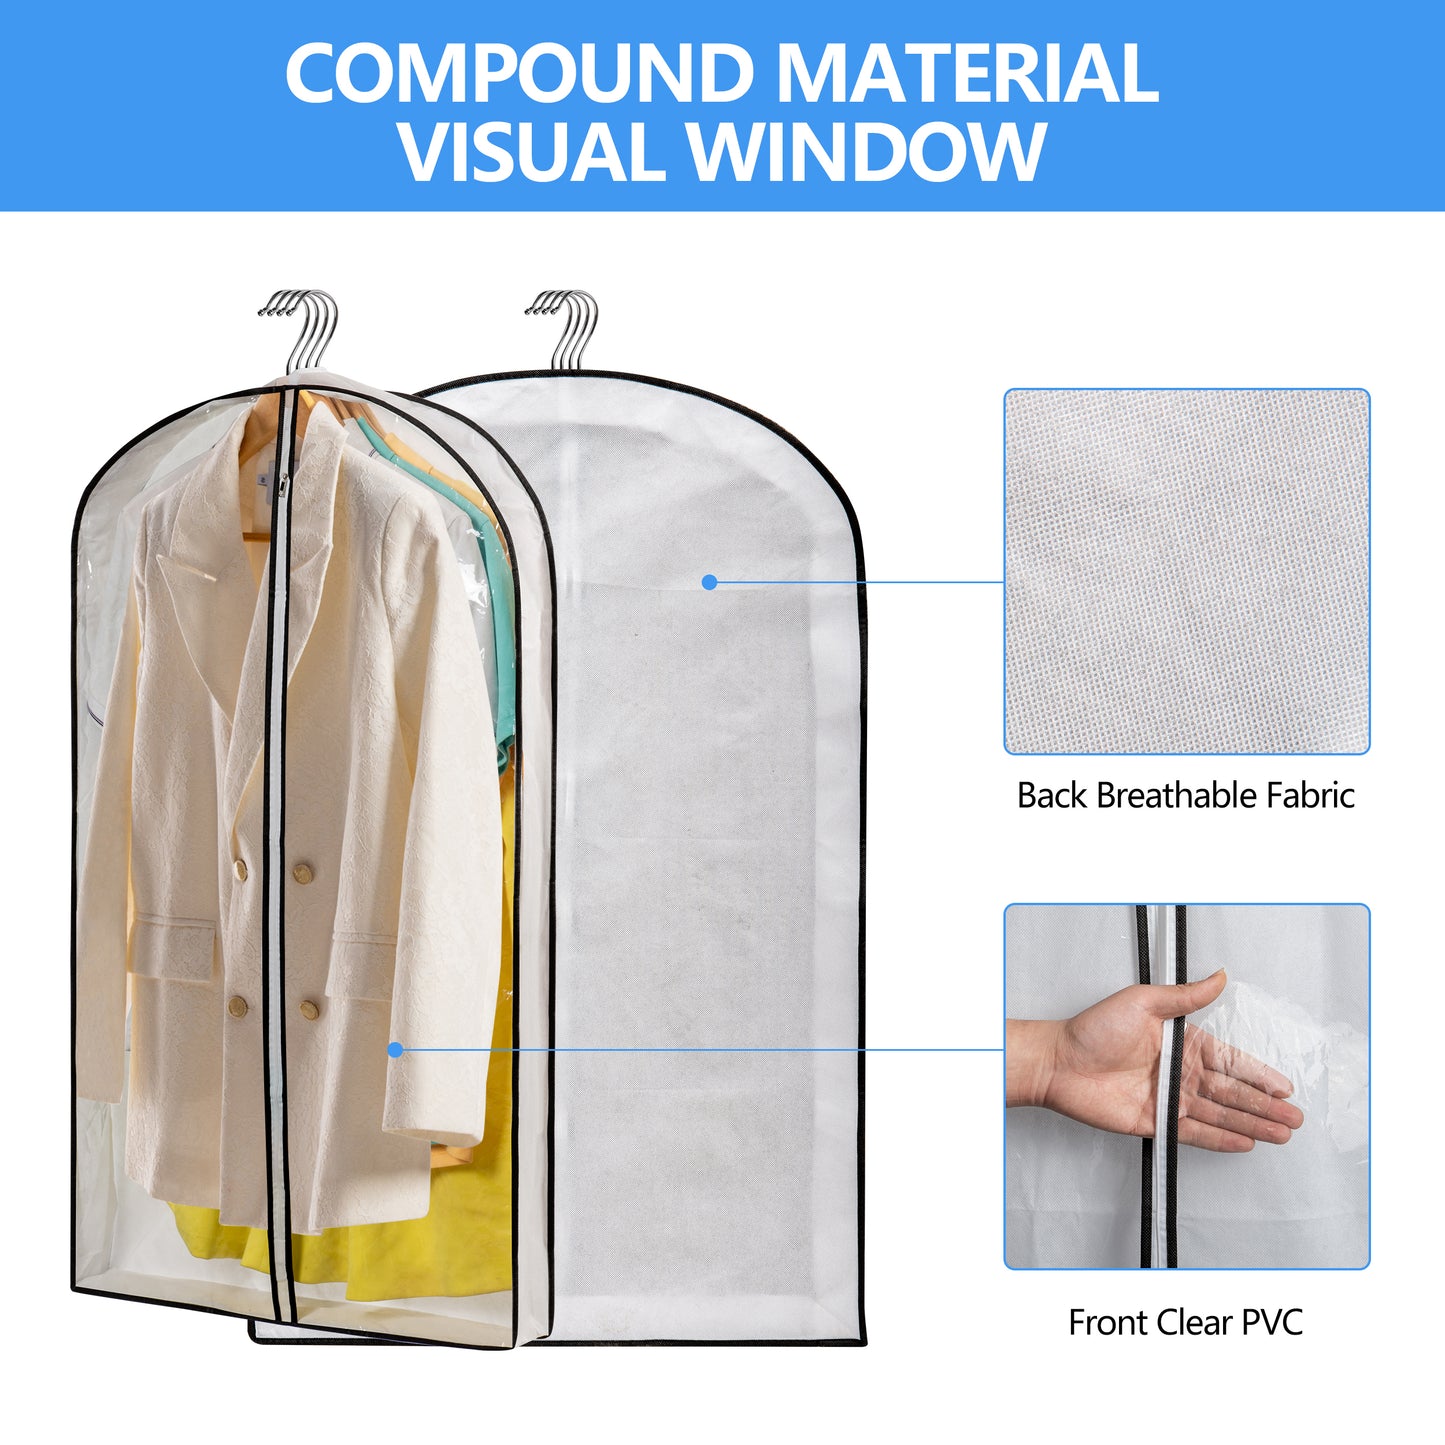 Mskitchen Hanging Clothes Bag with 4" Gusseted Garment Bag for Storage Suit Bag for Closet Clear Garment Bags Dress Covers Garment Bags for Suits, Sweaters, Shirts - 24"x 40"x 4"/ 3 Pack-6 Pack